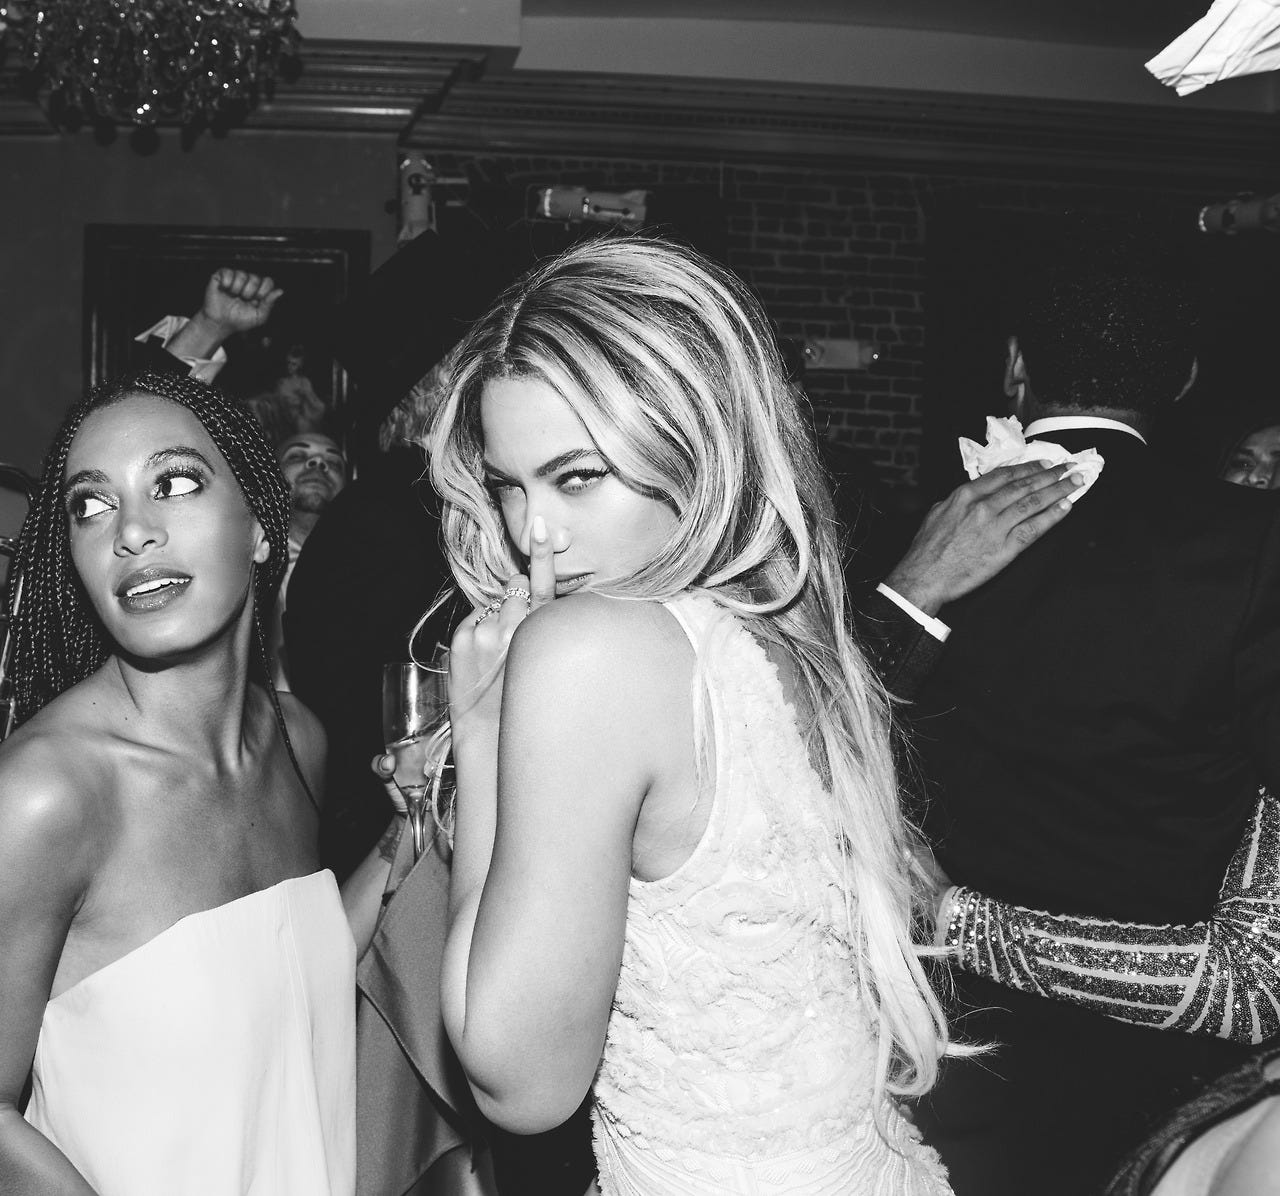 https://thejasminebrand.com/wp-content/uploads/2014/01/beyonce-solange-tina-knowles-60th-birthday-party-new-orleans-the-jasmine-brand.jpg